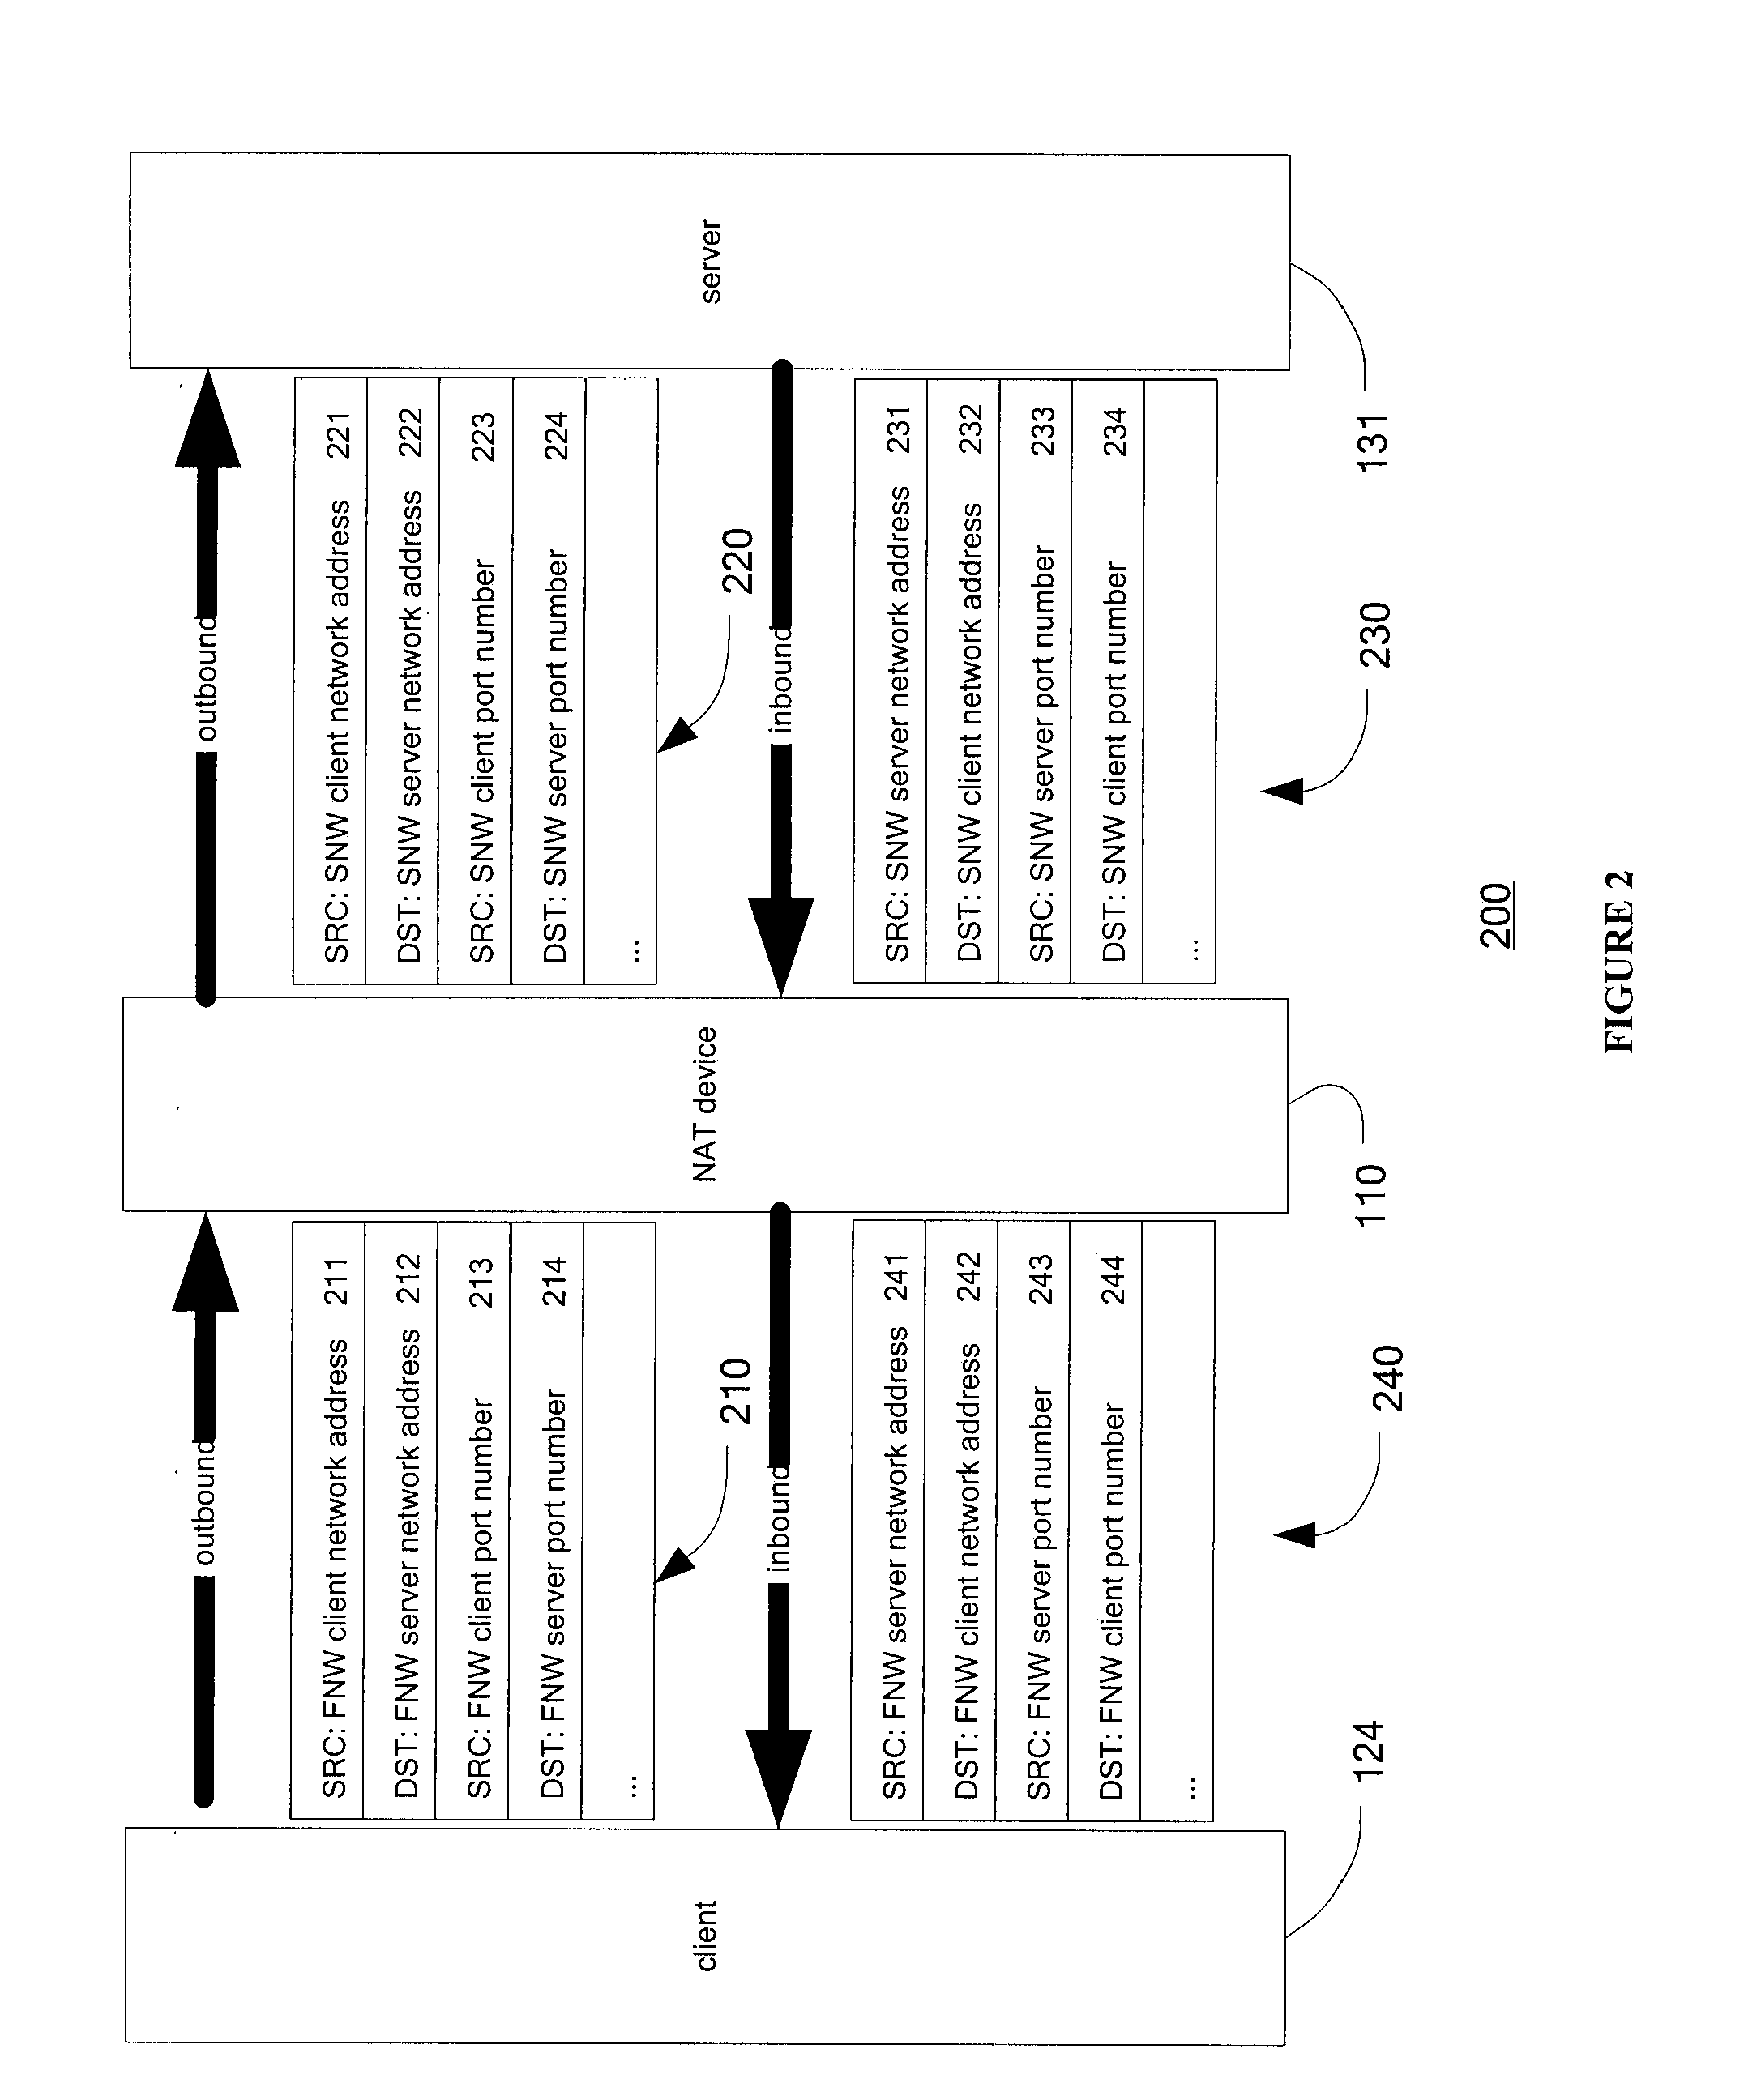 Method and apparatus for network port and network address translation